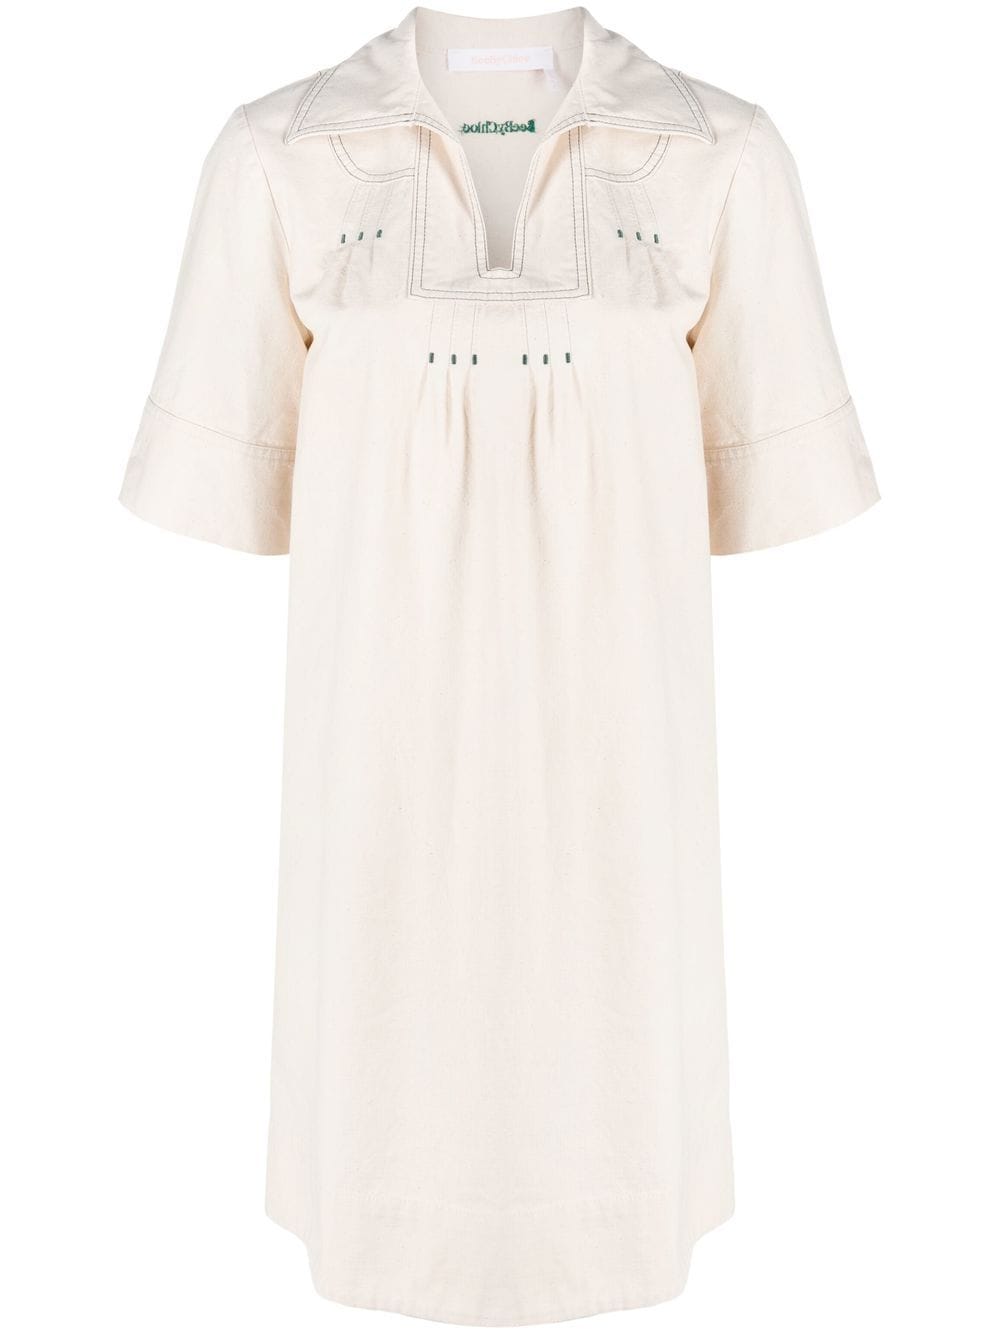 See by Chloé short-sleeve embroidered minidress - White von See by Chloé